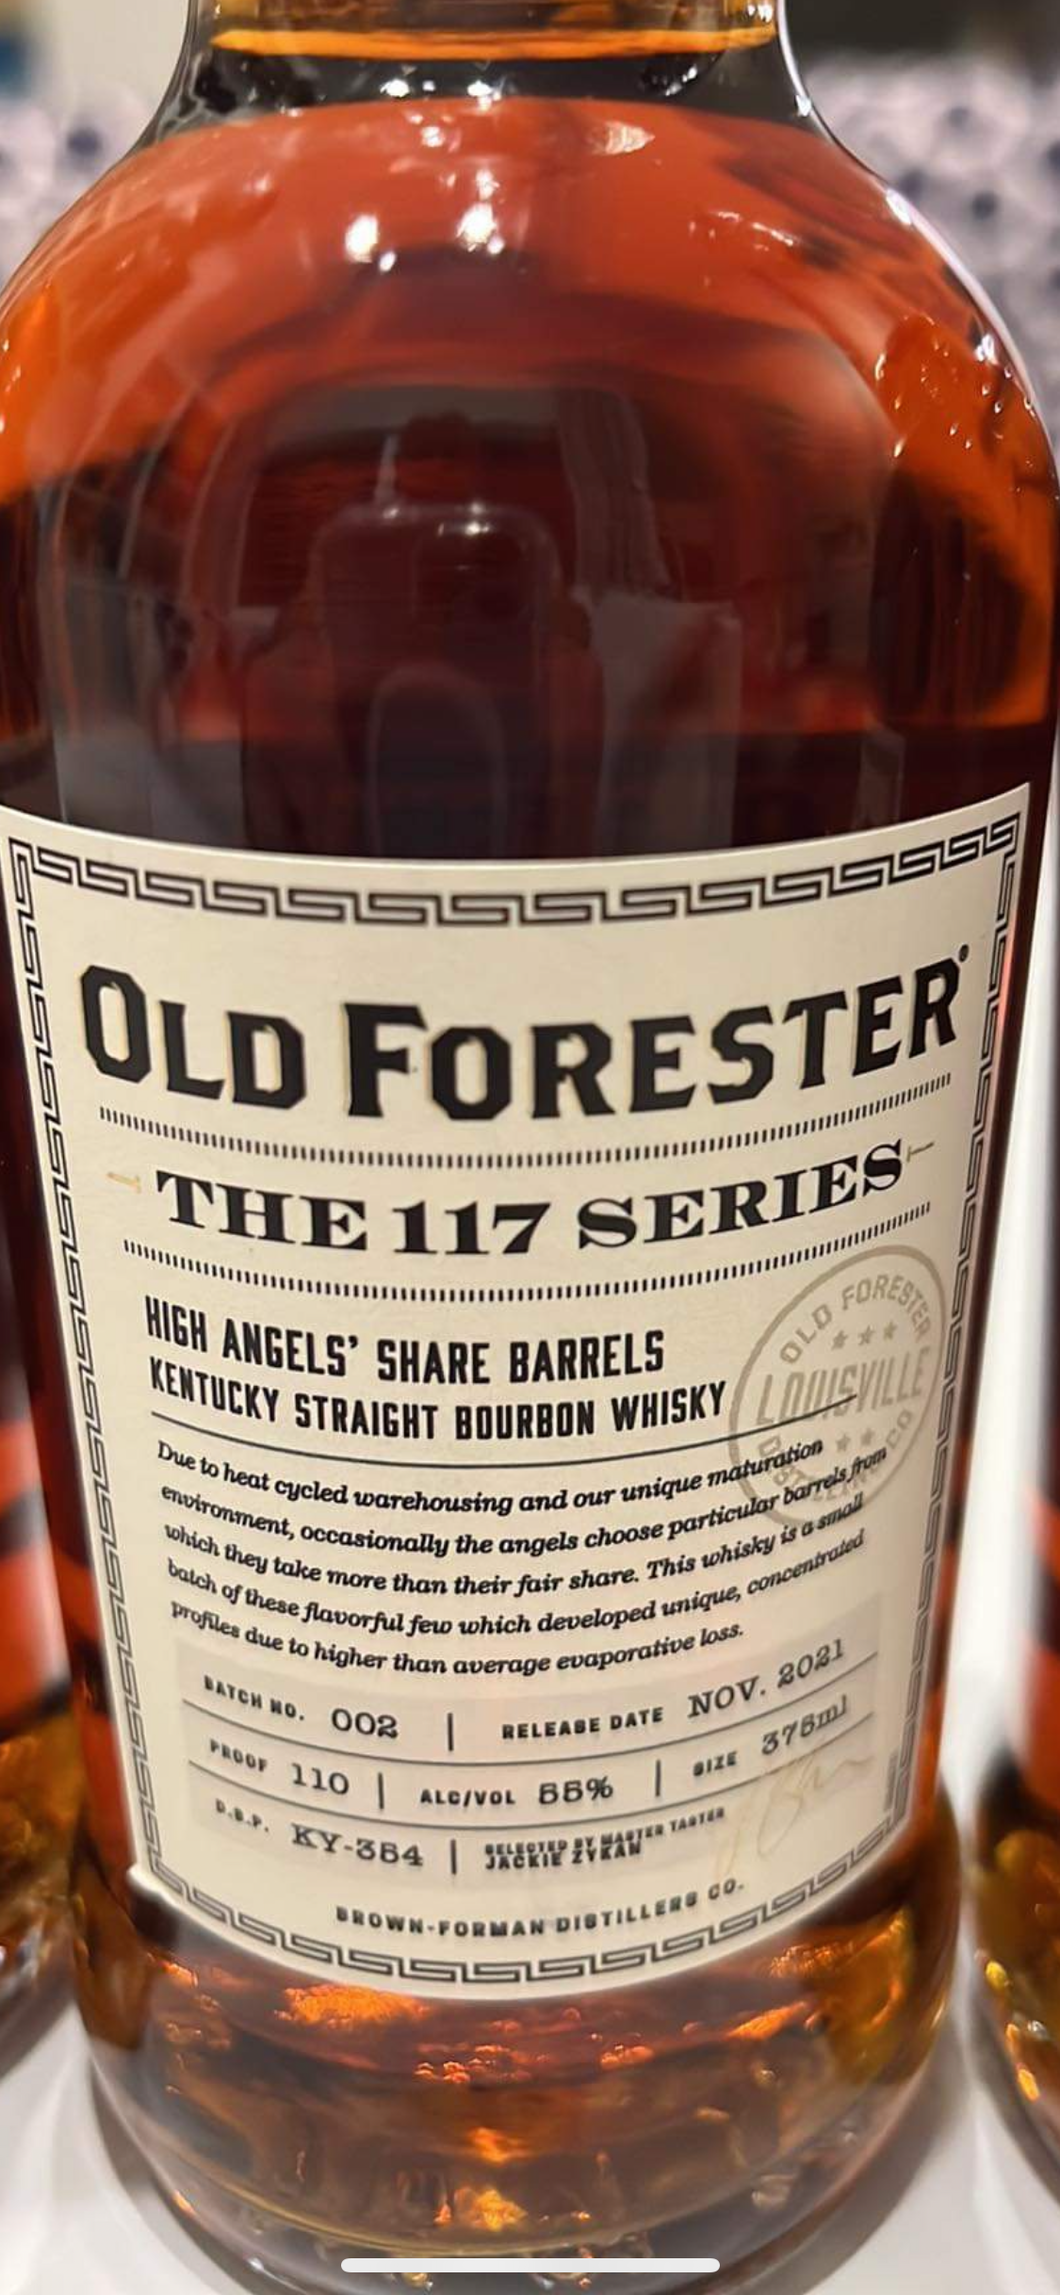 OLD FORESTER THE 117 SERIES HIGH ANGELS SHARE BARRELS BATCH 2